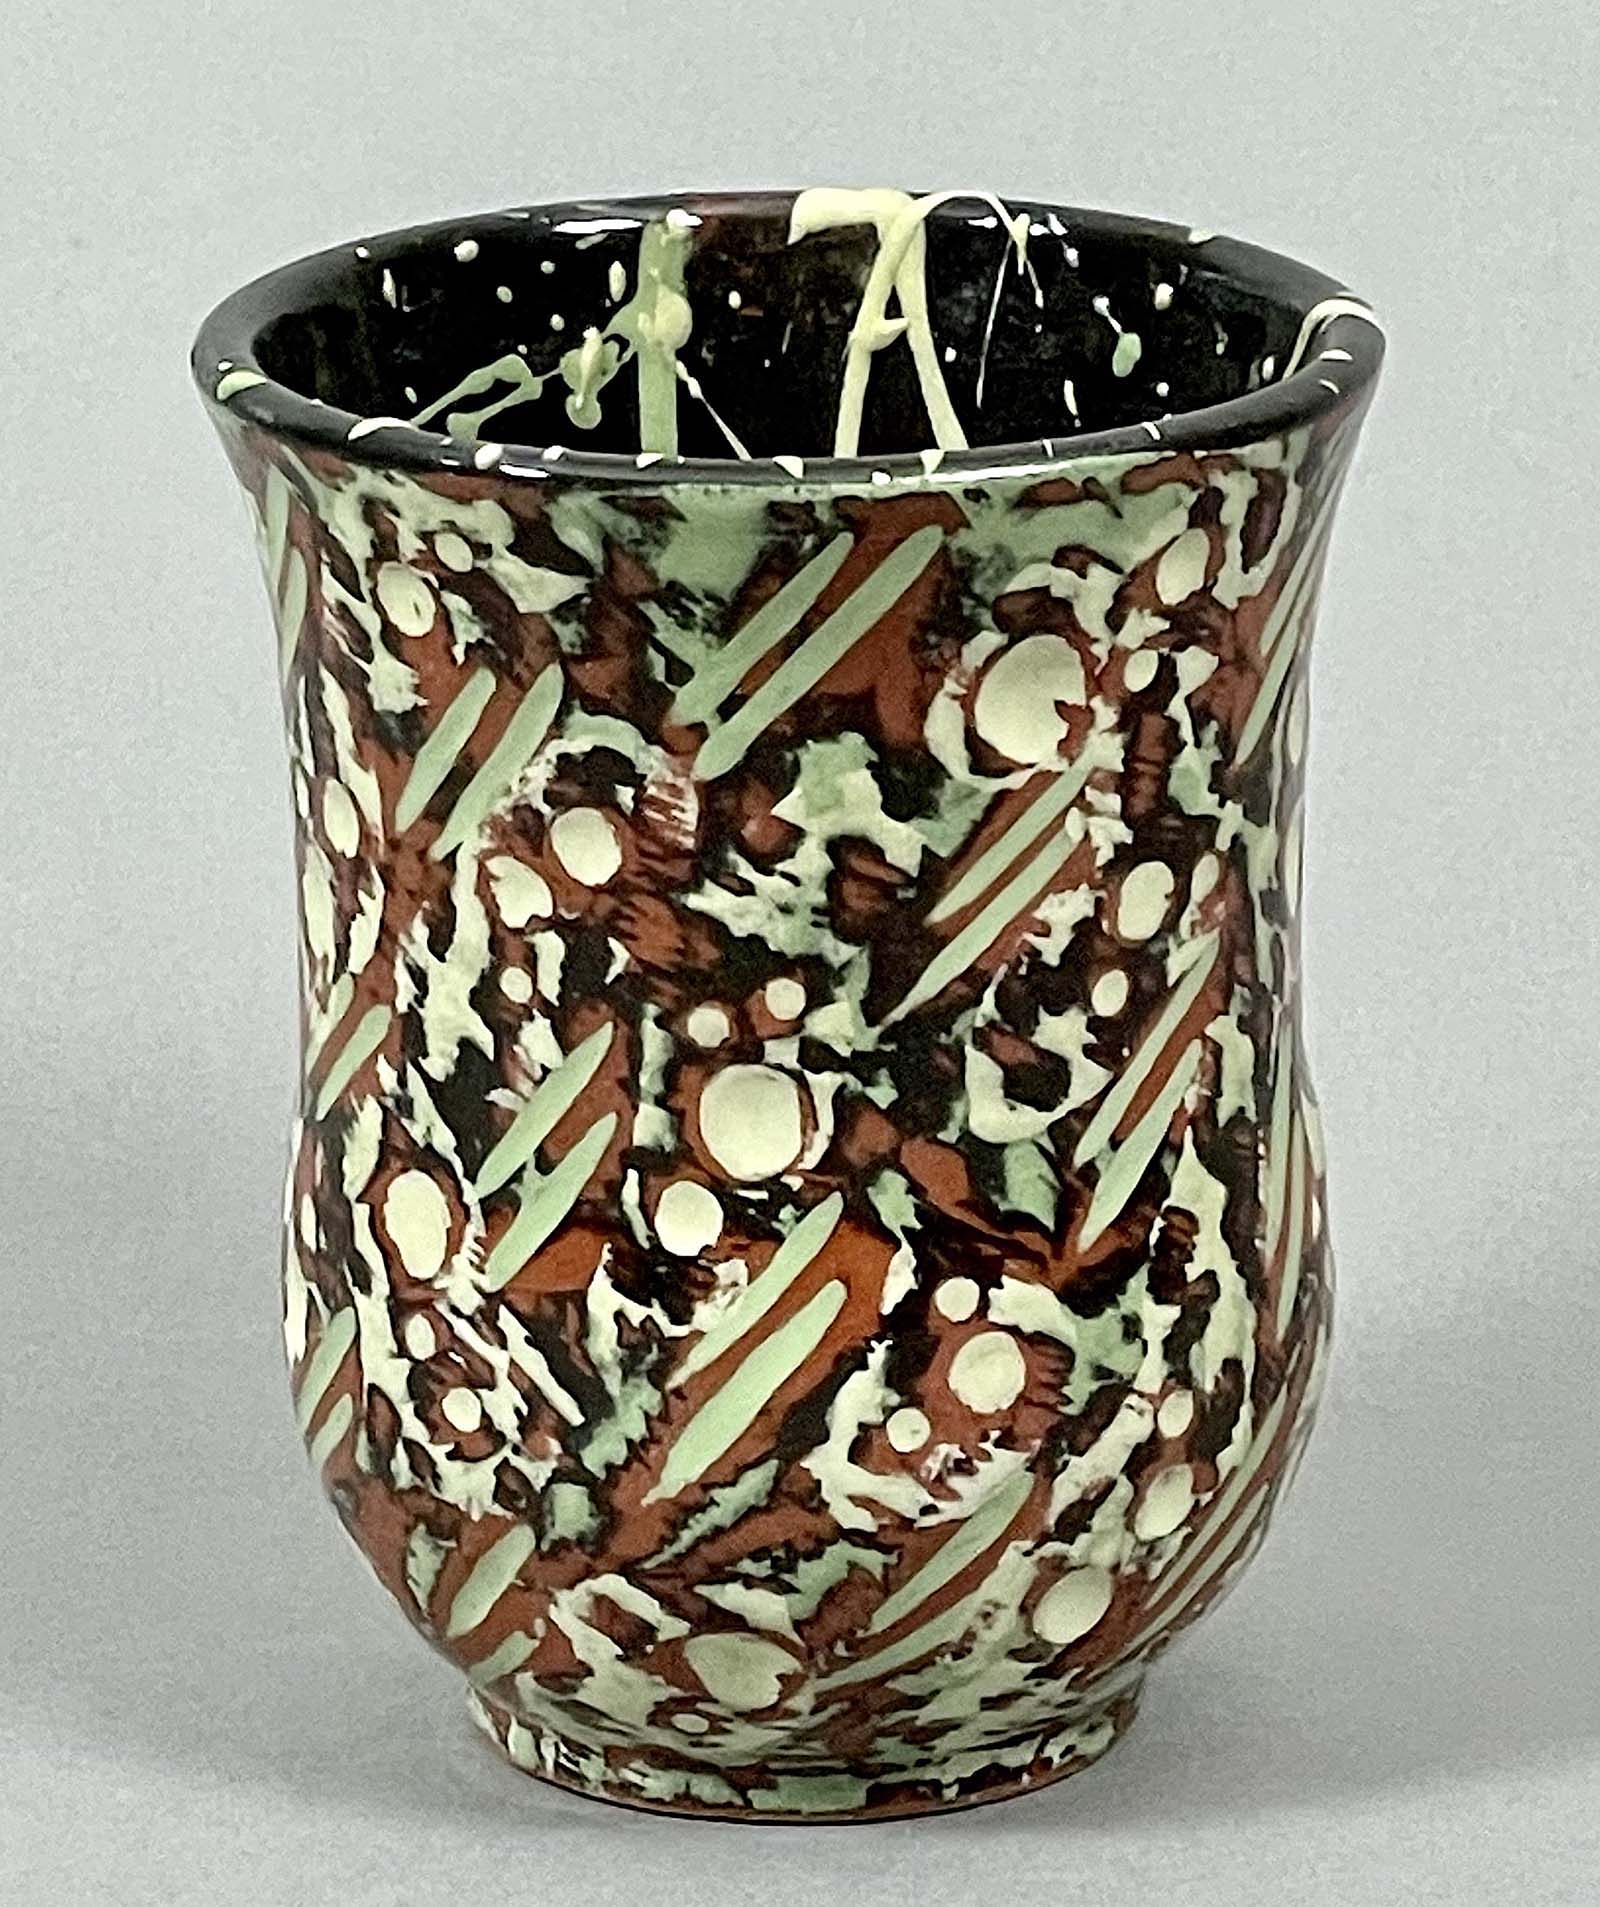 Swanica Ligtenberg, green cup, low-ﬁre red clay, engraved, colored slips, clear glaze, bisque fired cone 04, glaze fired to cone 05.